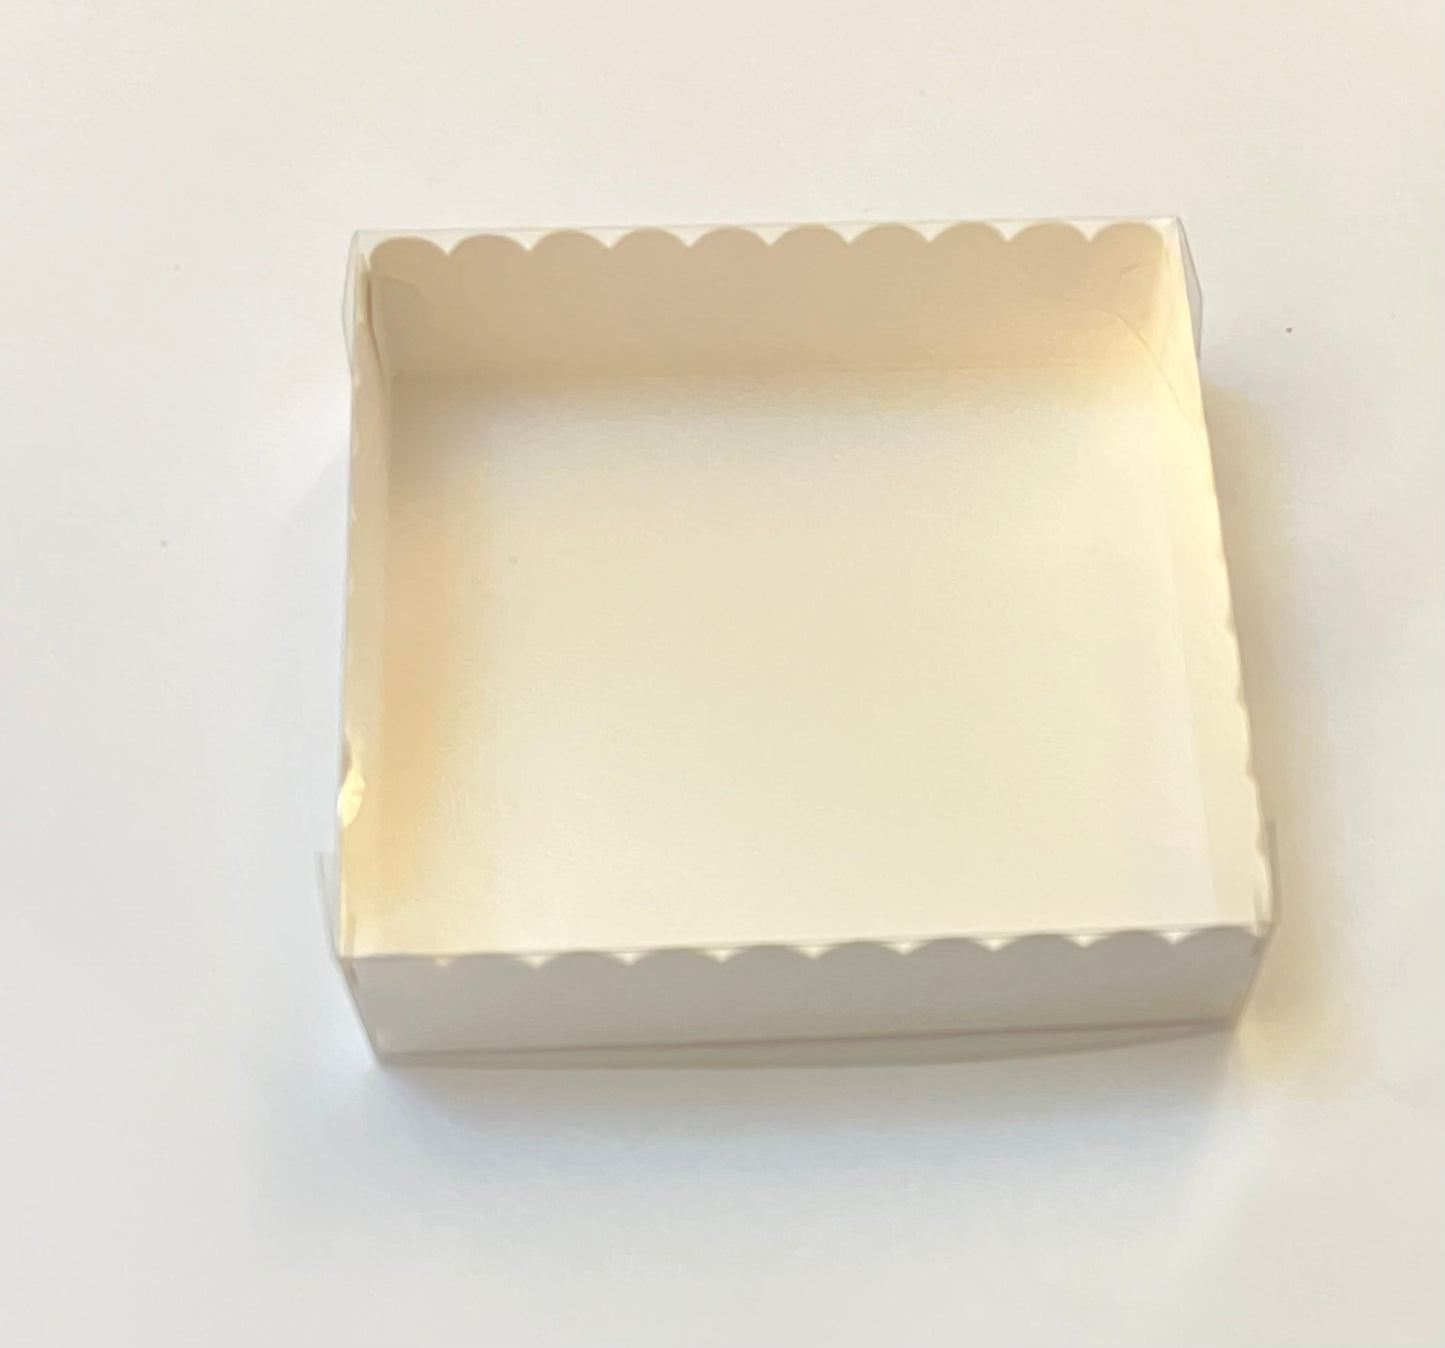 Clear Lid Box White  With Scalloped Edge And Sleeve - 15*15*3.5cm Mothers Day